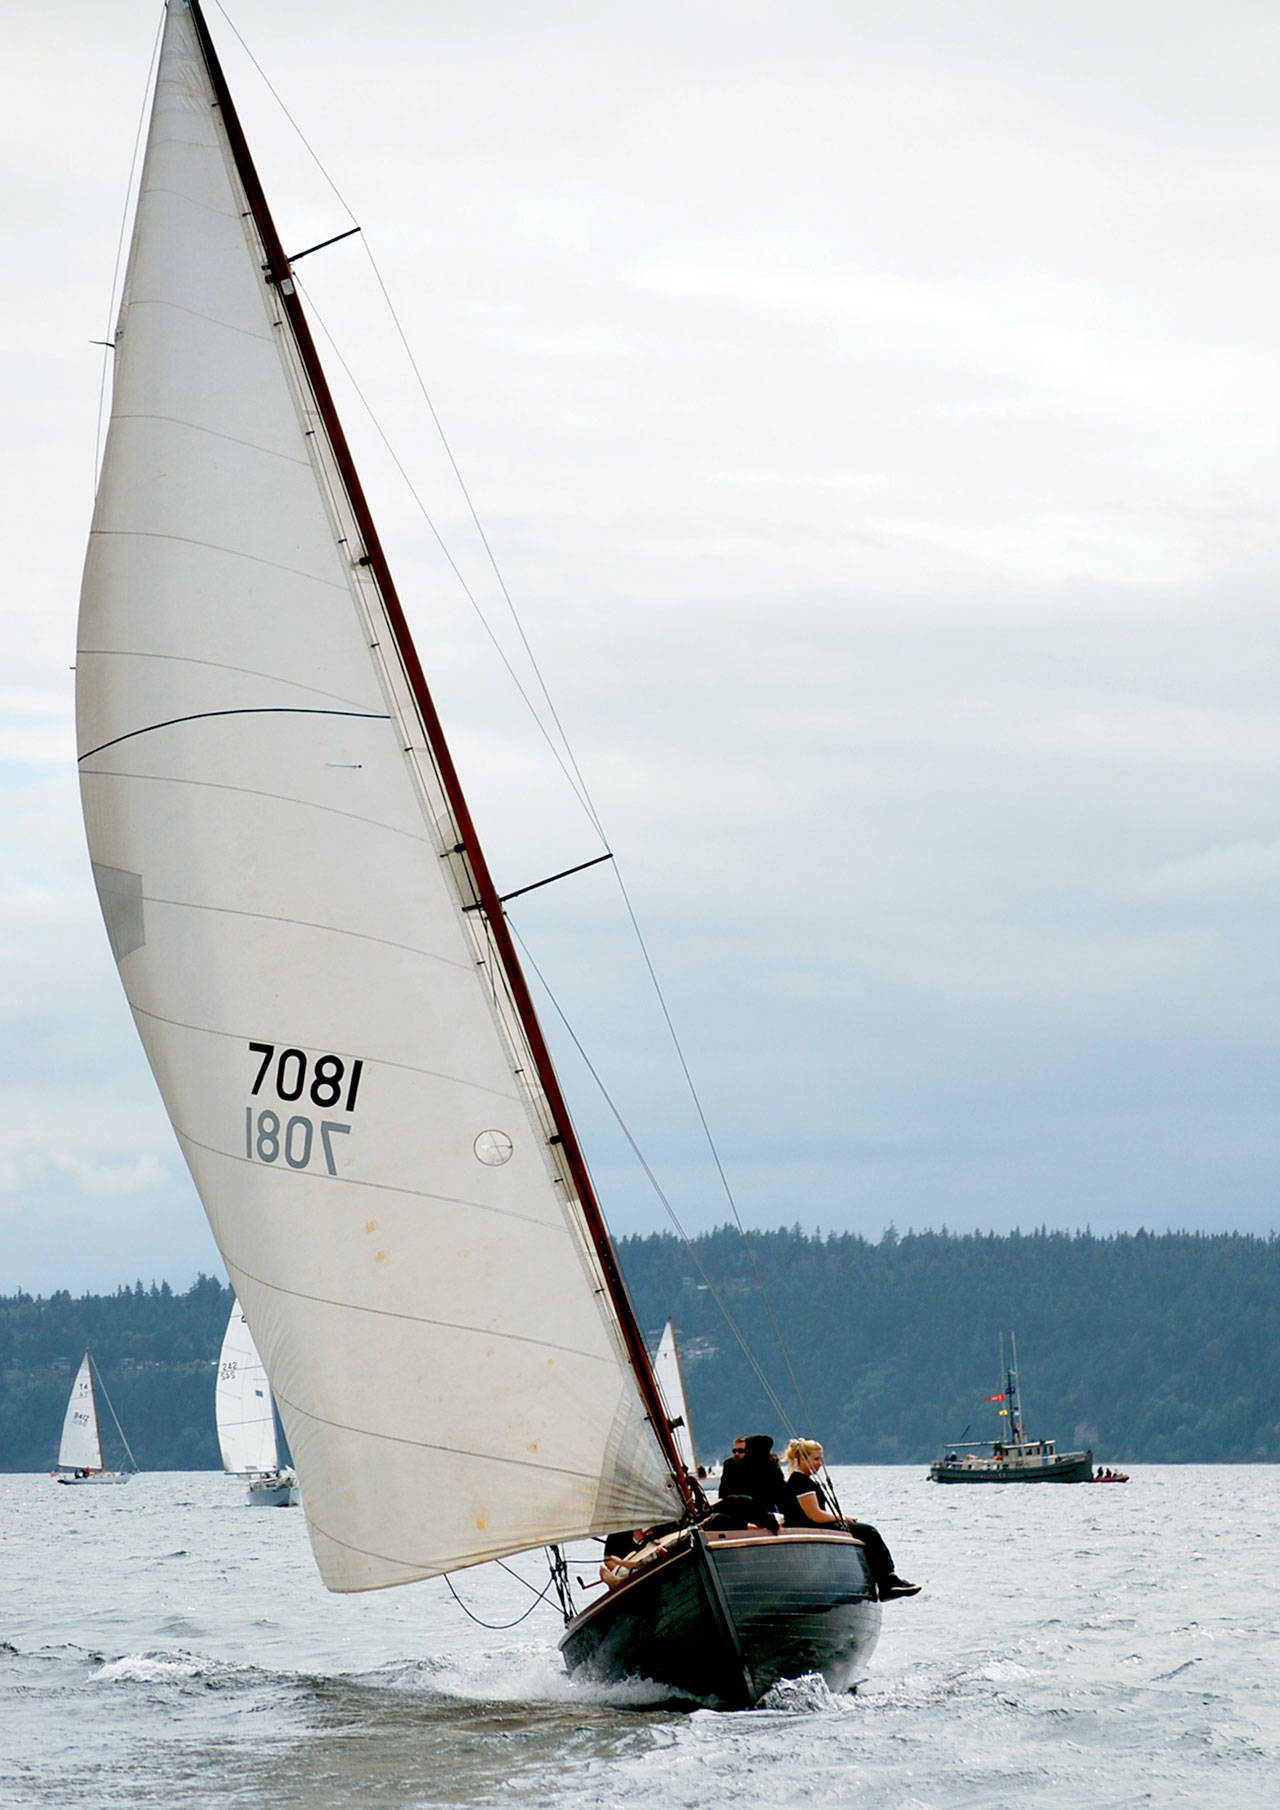 The 24th annual Classic Mariners’ Regatta boat race will be held June 2-4 at the Northwest Maritime Center, 431 Water St., in Port Townsend. (Ashlyn E. Brown)